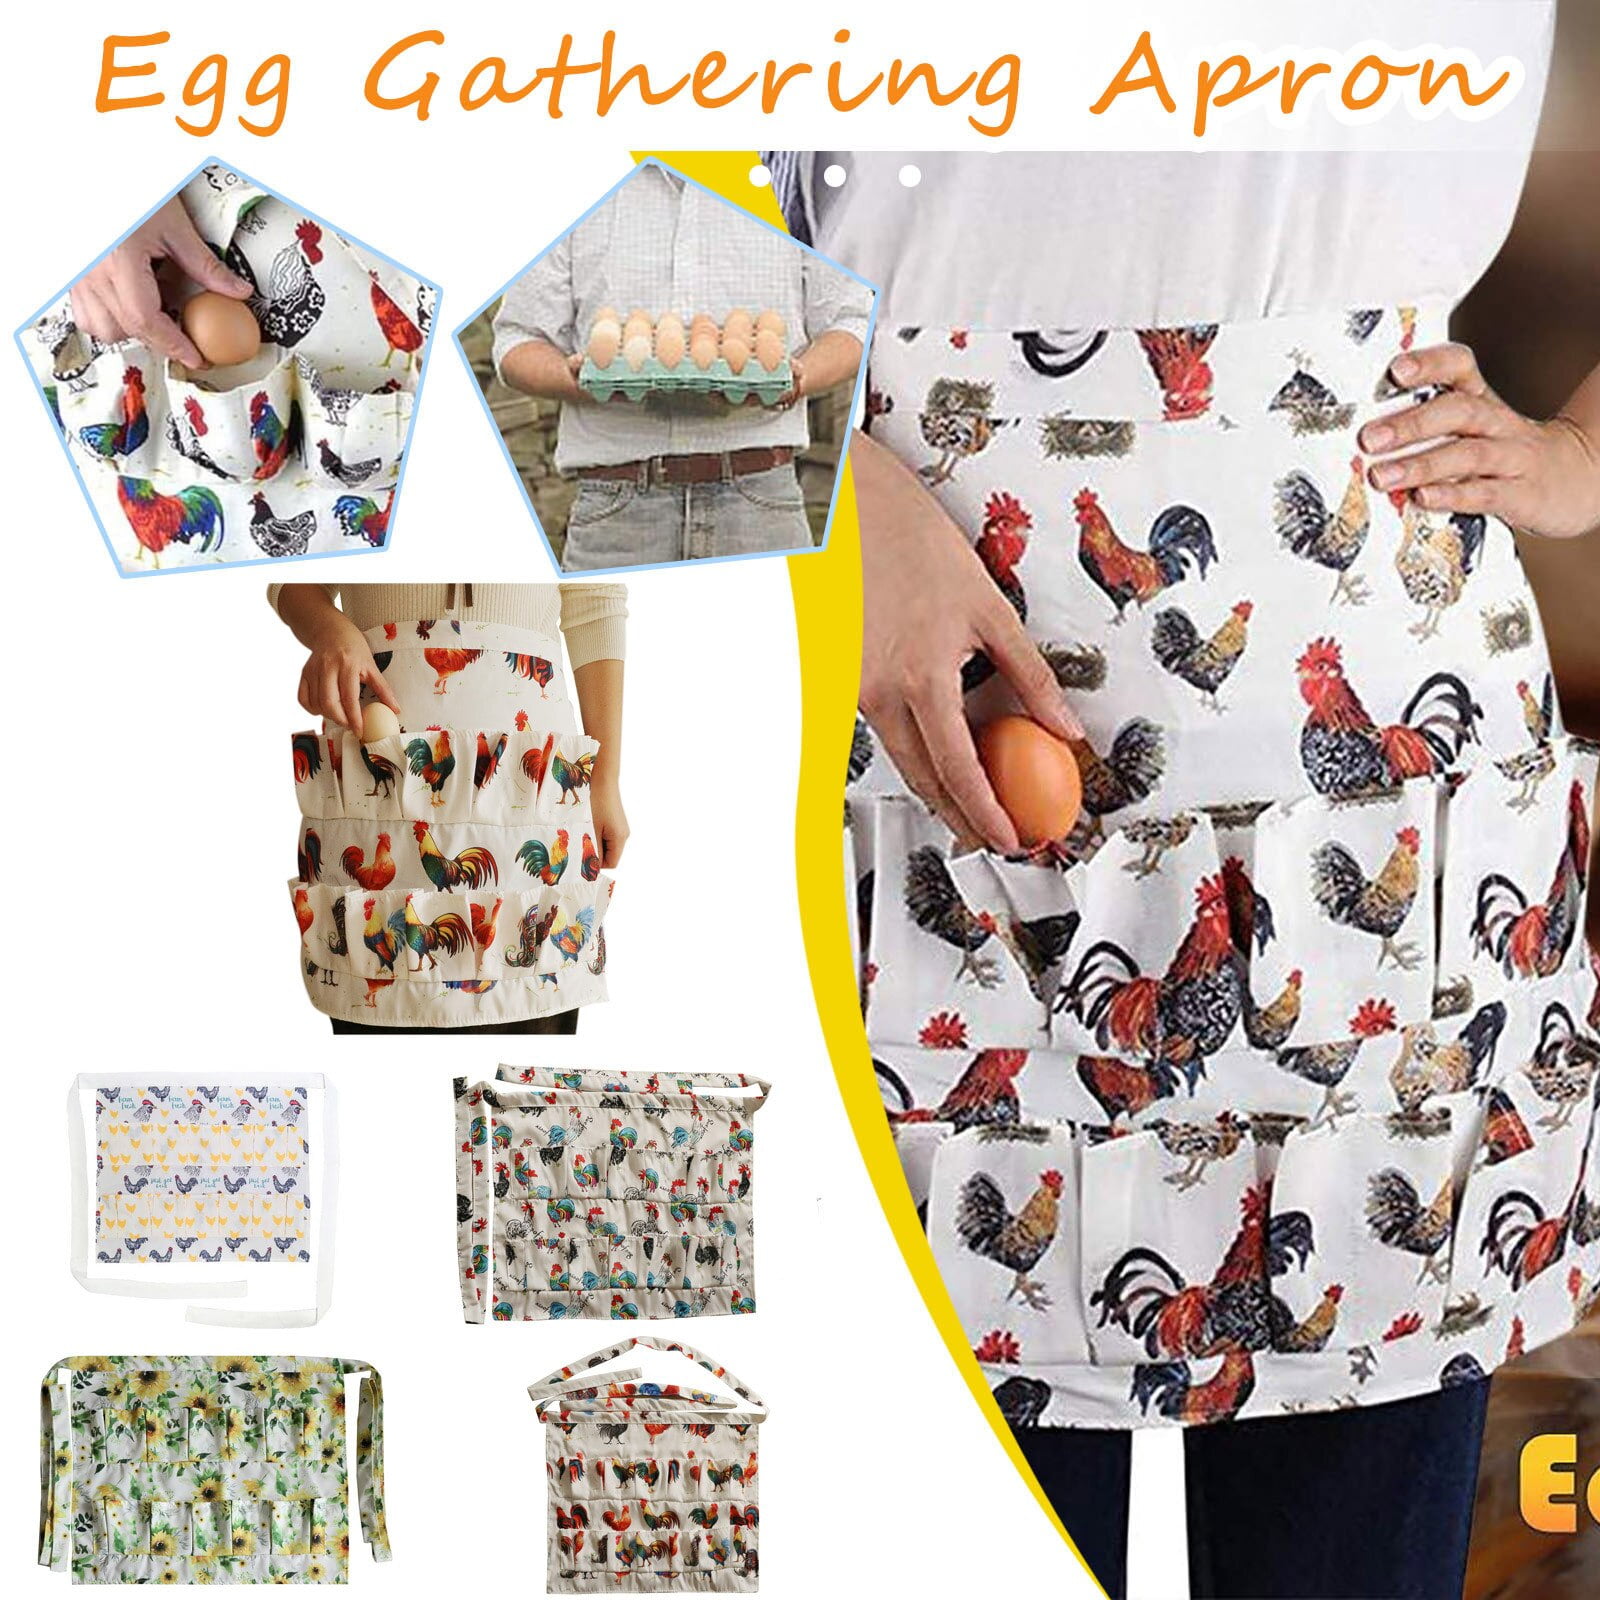 HorLaLa Egg Collection Apron with 18 Pockets for Gathering Chicken Duck  Goose Eggs,Apron Fresh Eggs,Egg Collecting and Waist Backyard Coops,Great